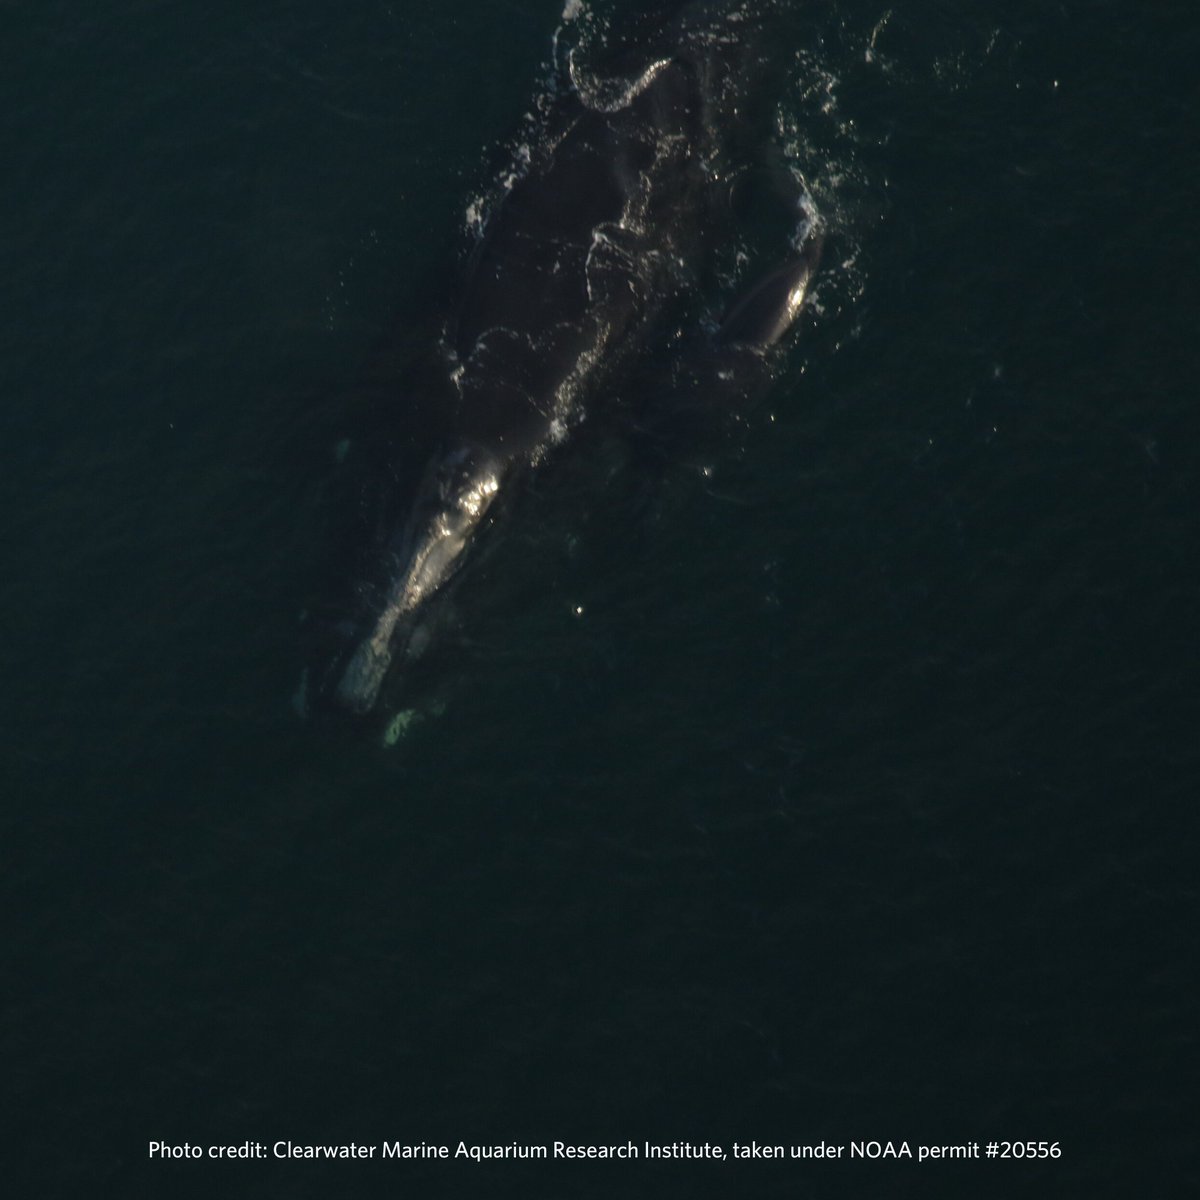 Another whale cow/calf pair was sighted off Georgia's coast yesterday, bringing the calf count to 5 as of December 26th.
 
Right whale #2605 ‘Smoke’ is 27 years old and this is her 4th known calf.